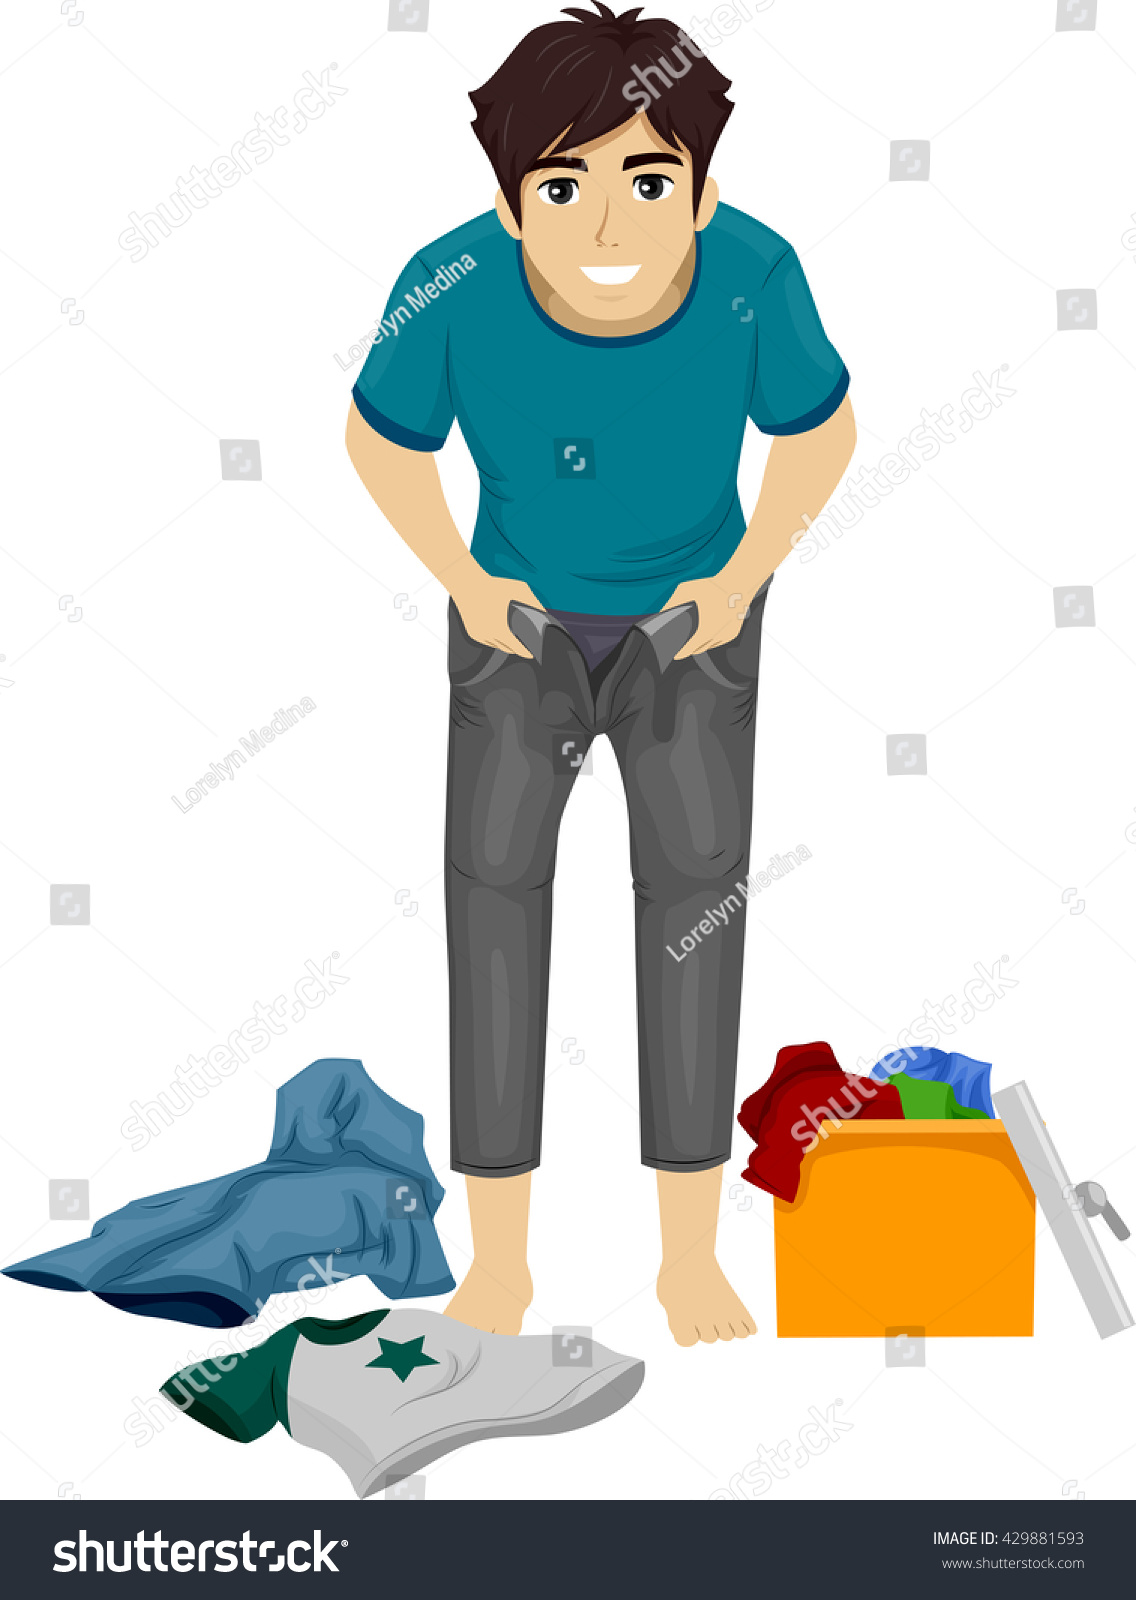 Teen in tight shorts Images, Stock Photos & Vectors | Shutterstock